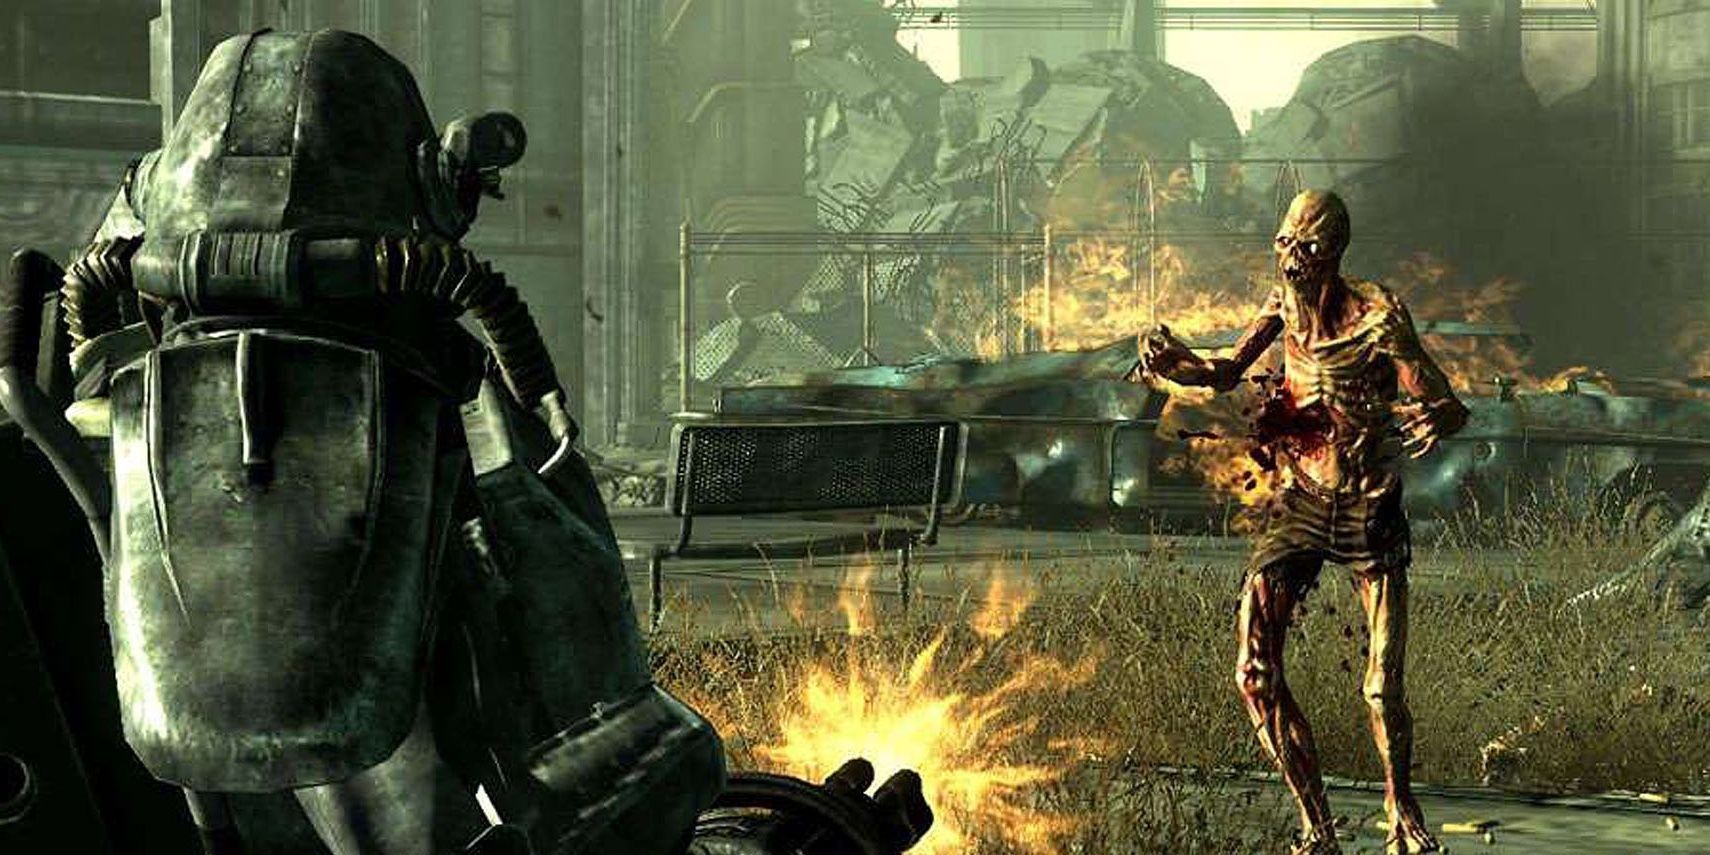 Fighting A Ghoul From Fallout 3